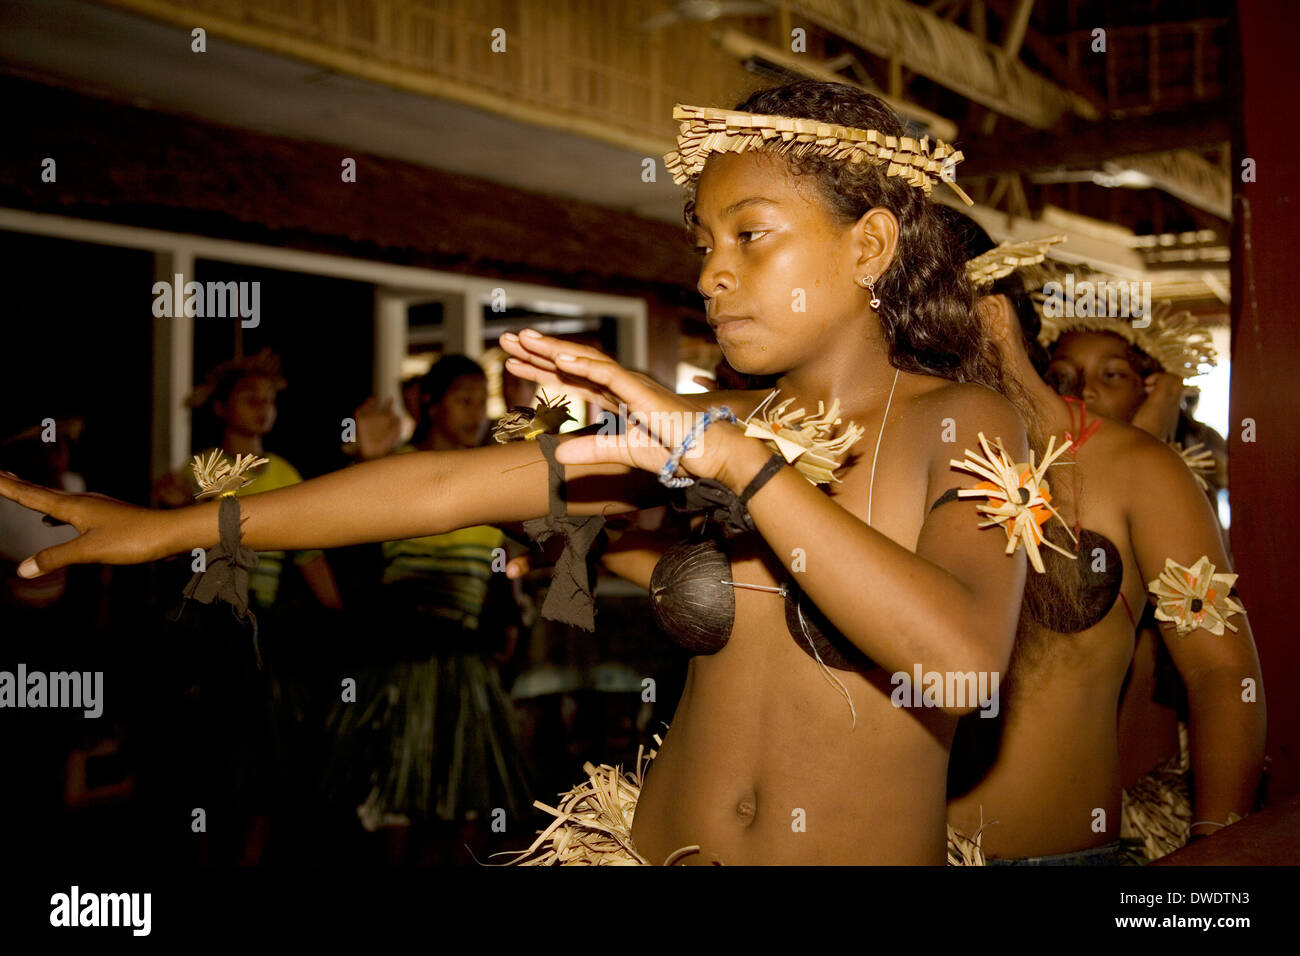 Youngsters of Nggela Island in traditional costumes perform dances, Solomon  Islands, South Pacific Stock Photo - Alamy